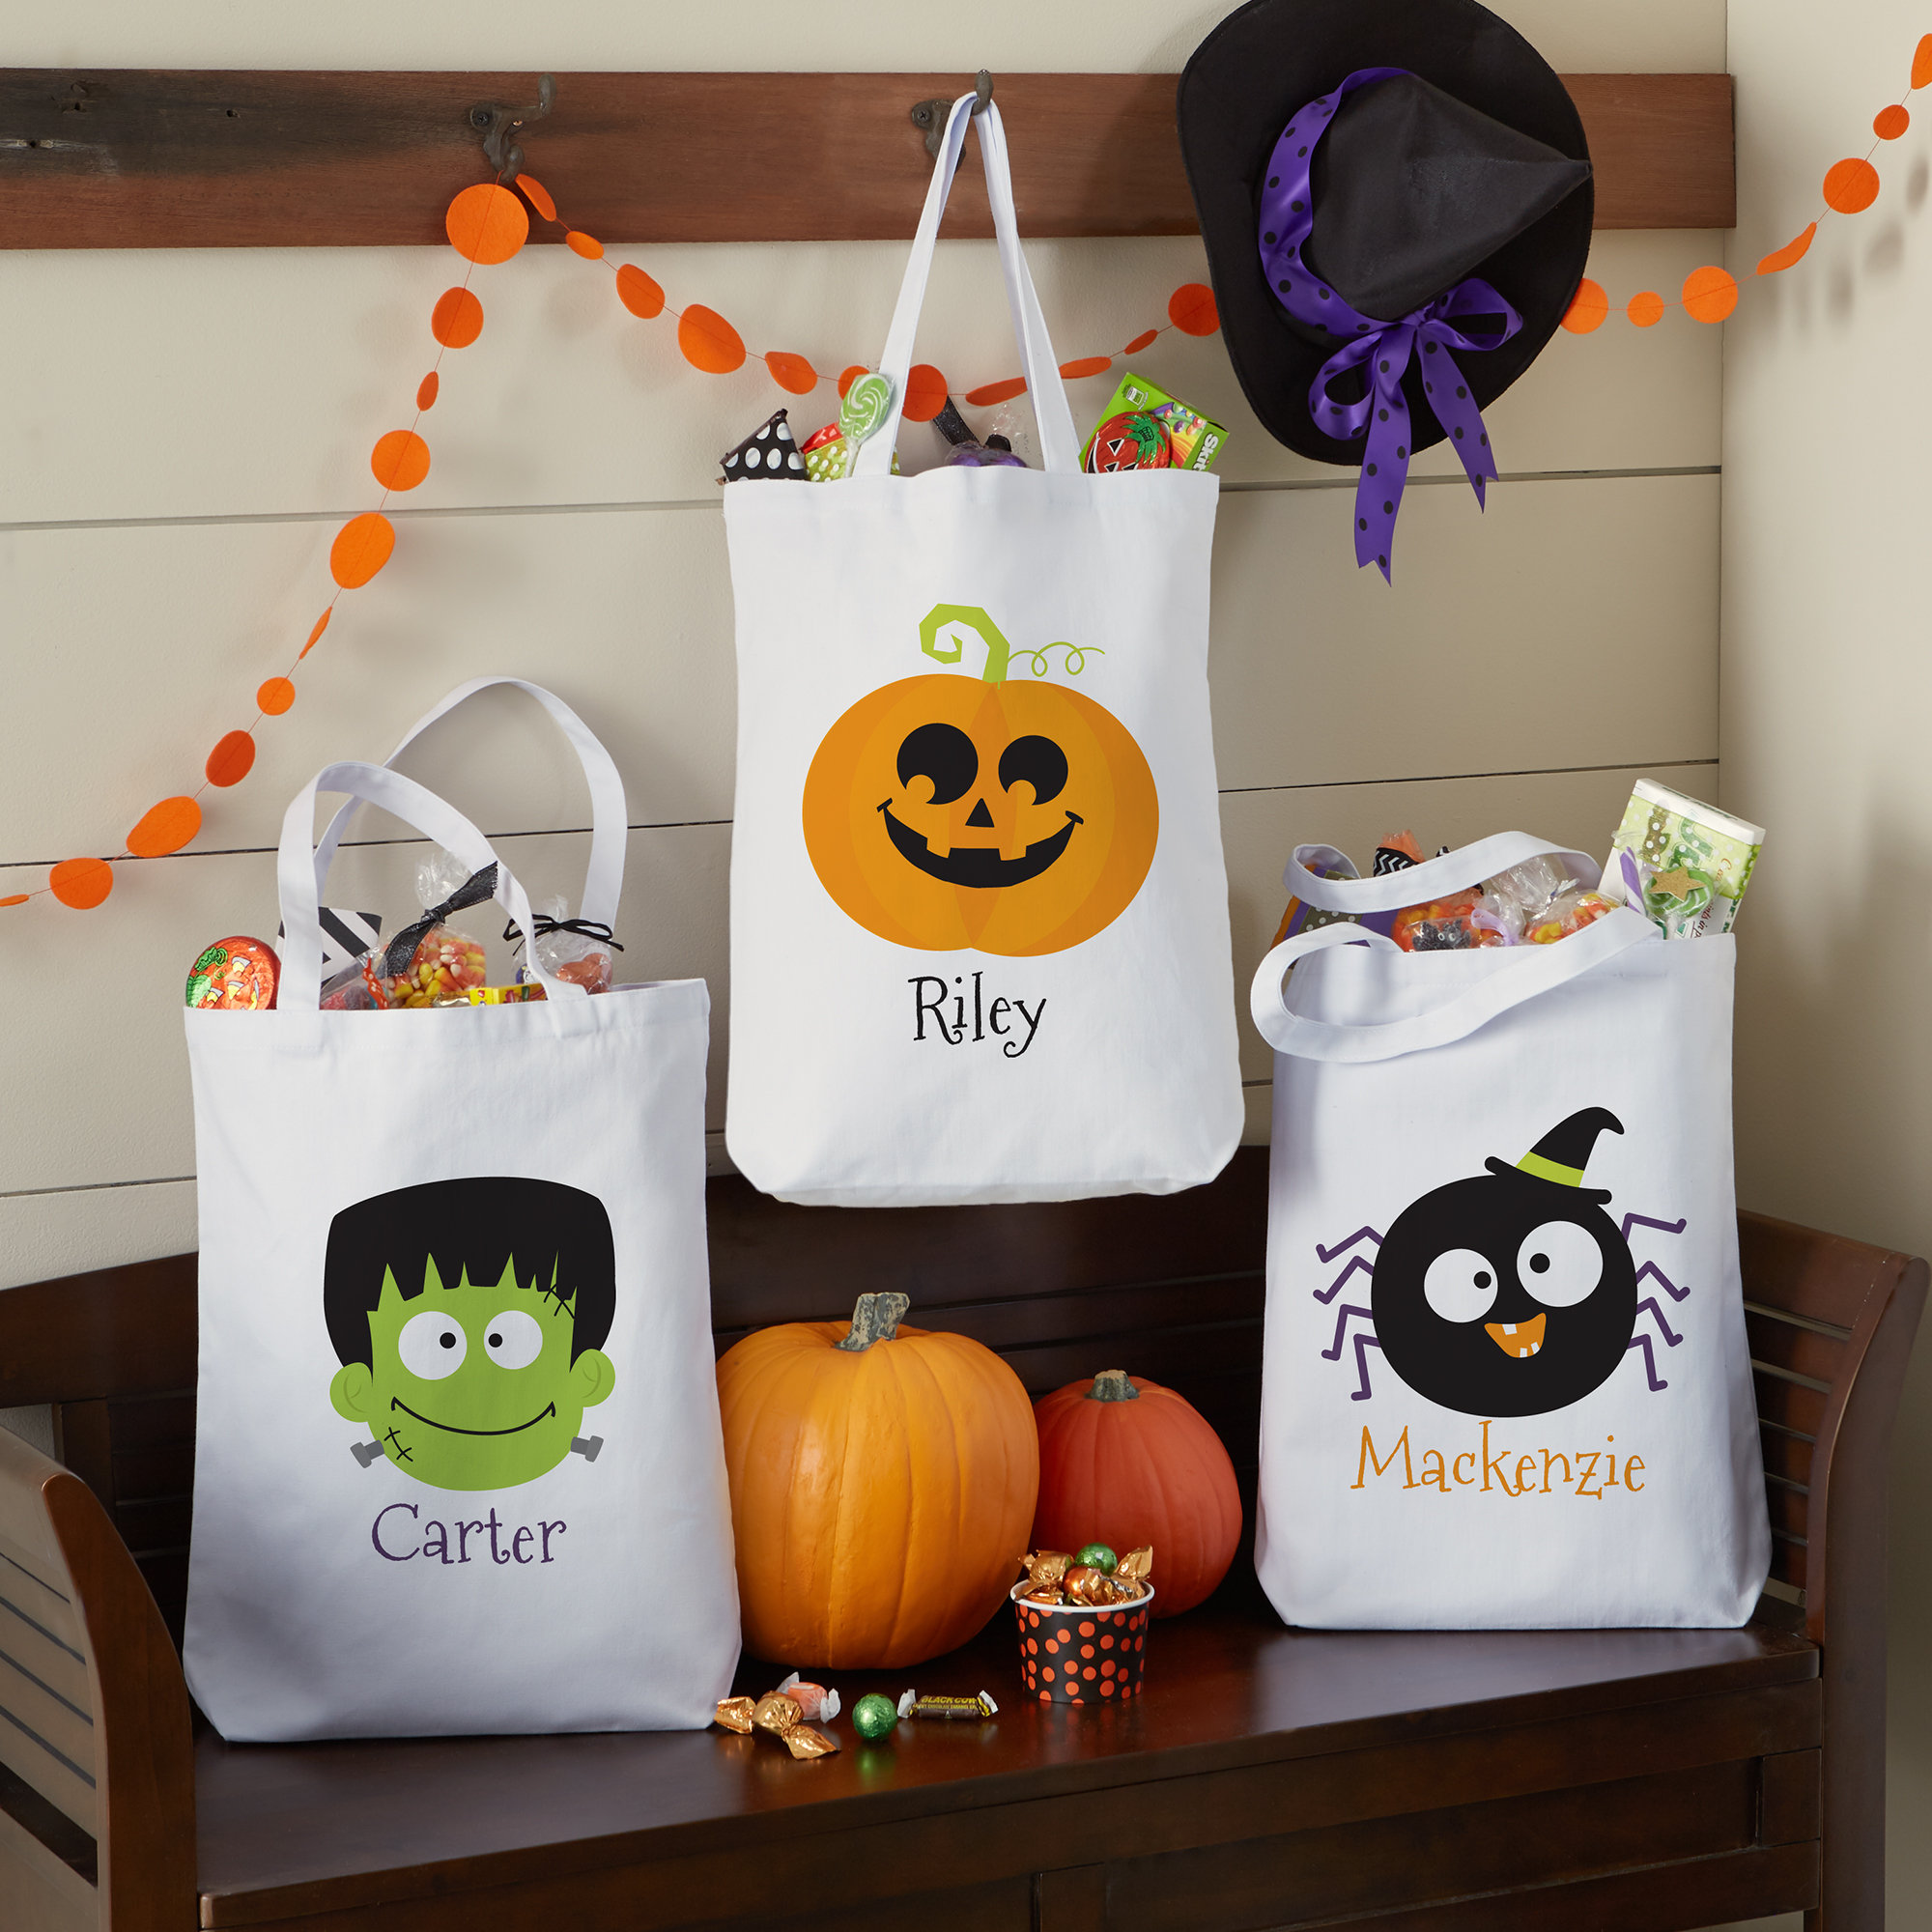 This Is My Halloween Costume Funny Fake Costume Tote Bag - My Icon